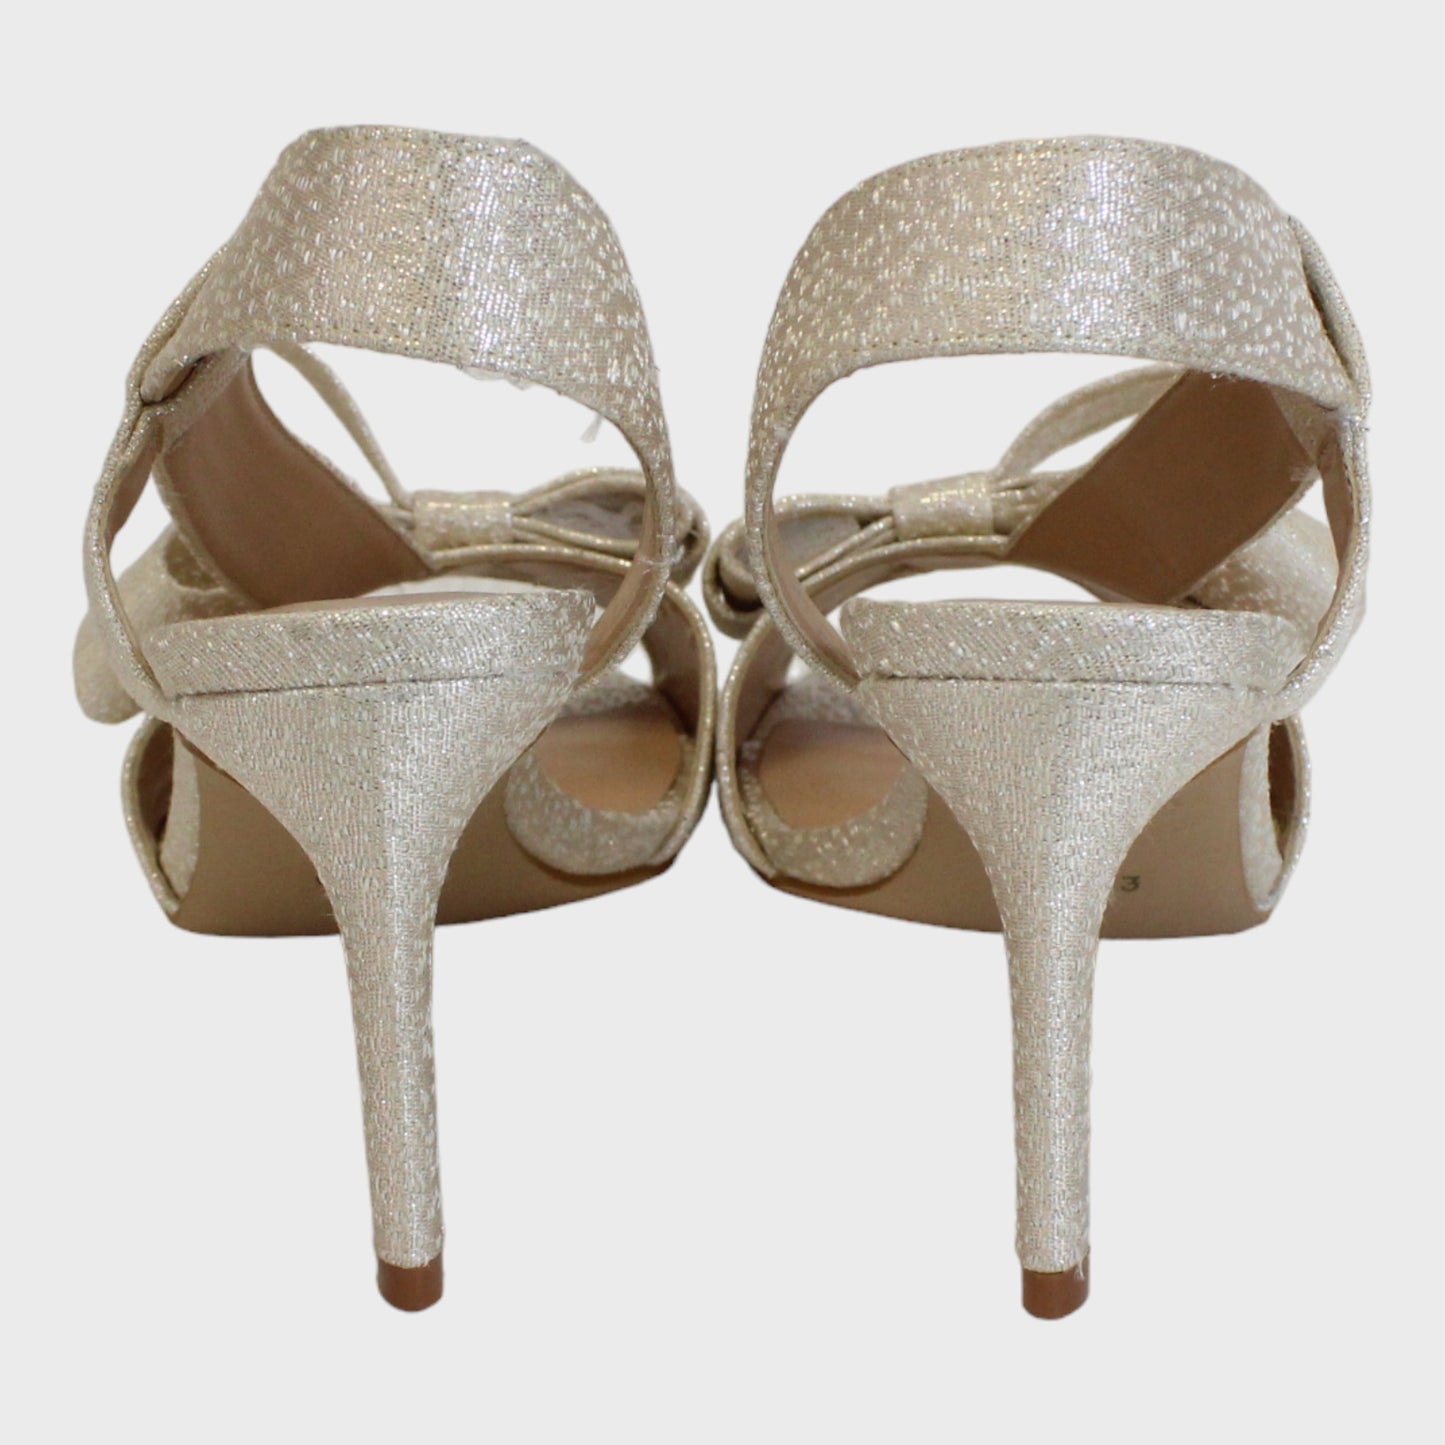 Women's Stiletto Heel Sling Back Sandals with Bow Detail Champagne Size 6 UK